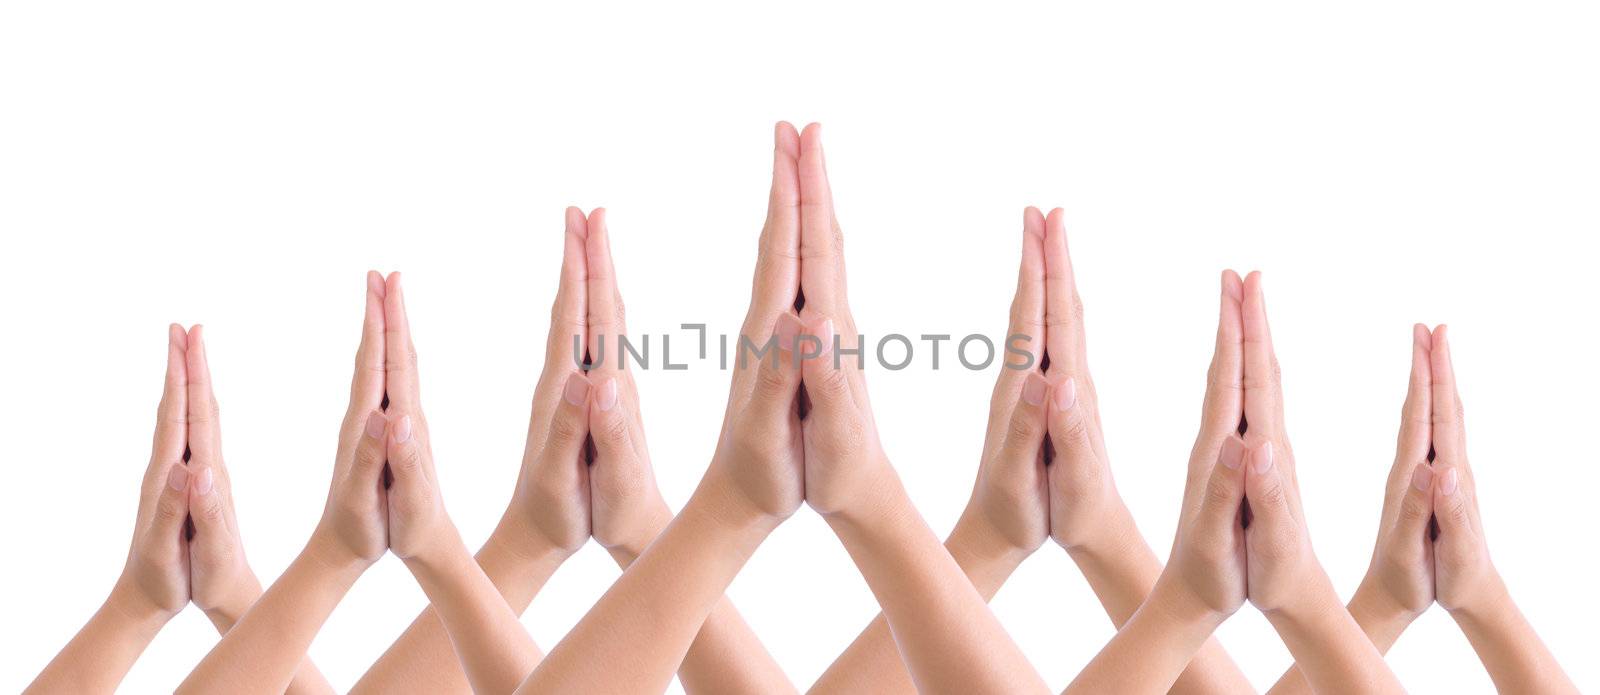 put hands together in salute